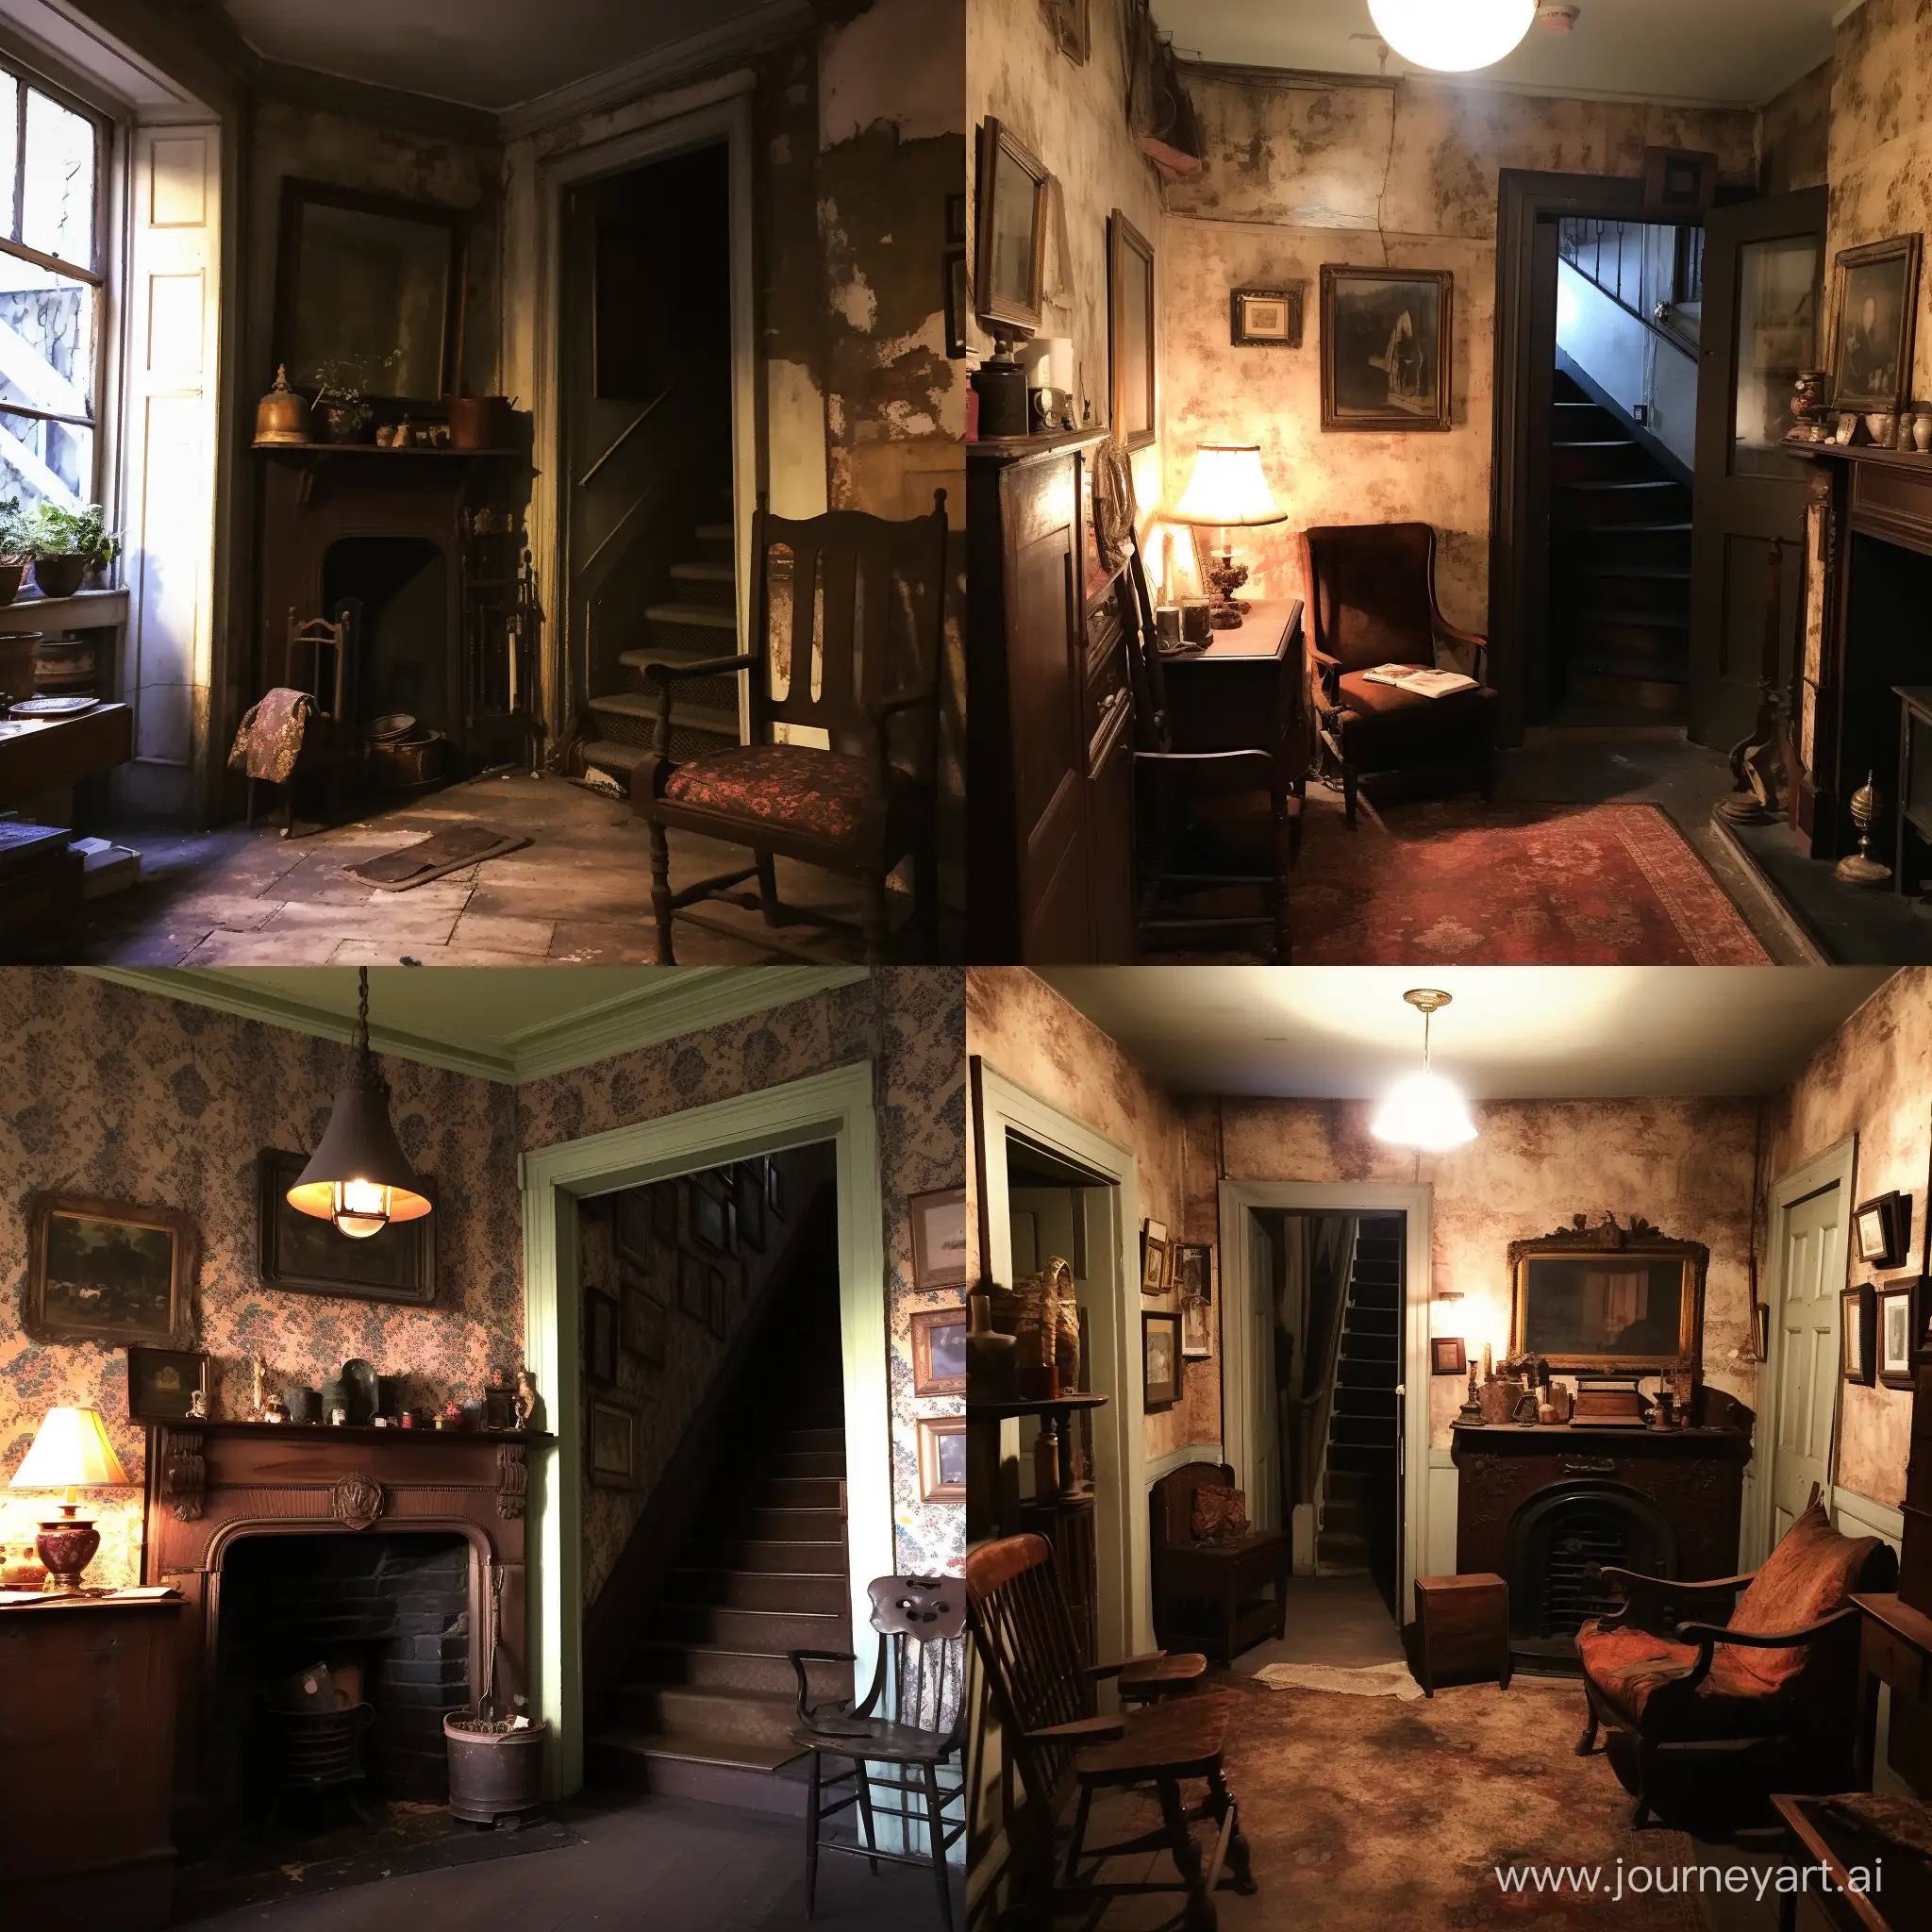 “A small side door led into the whitewashed corridor from which the three bedrooms opened. Holmes refused to examine the third chamber, so we passed at once to the second, that in which Miss Stoner was now sleeping, and in which her sister had met with her fate. It was a homely little room, with a low ceiling and a gaping fireplace, after the fashion of old country-houses. A brown chest of drawers stood in one corner, a narrow white-counterpaned bed in another, and a dressing-table on the left-hand side of the window. These articles, with two small wicker-work chairs, made up all the furniture in the room save for a square of Wilton carpet in the centre. The boards round and the panelling of the walls were of brown, worm-eaten oak, so old and discoloured that it may have dated from the original building of the house.”


The Adventures of Sherlock Holmes
Arthur Conan Doyle
